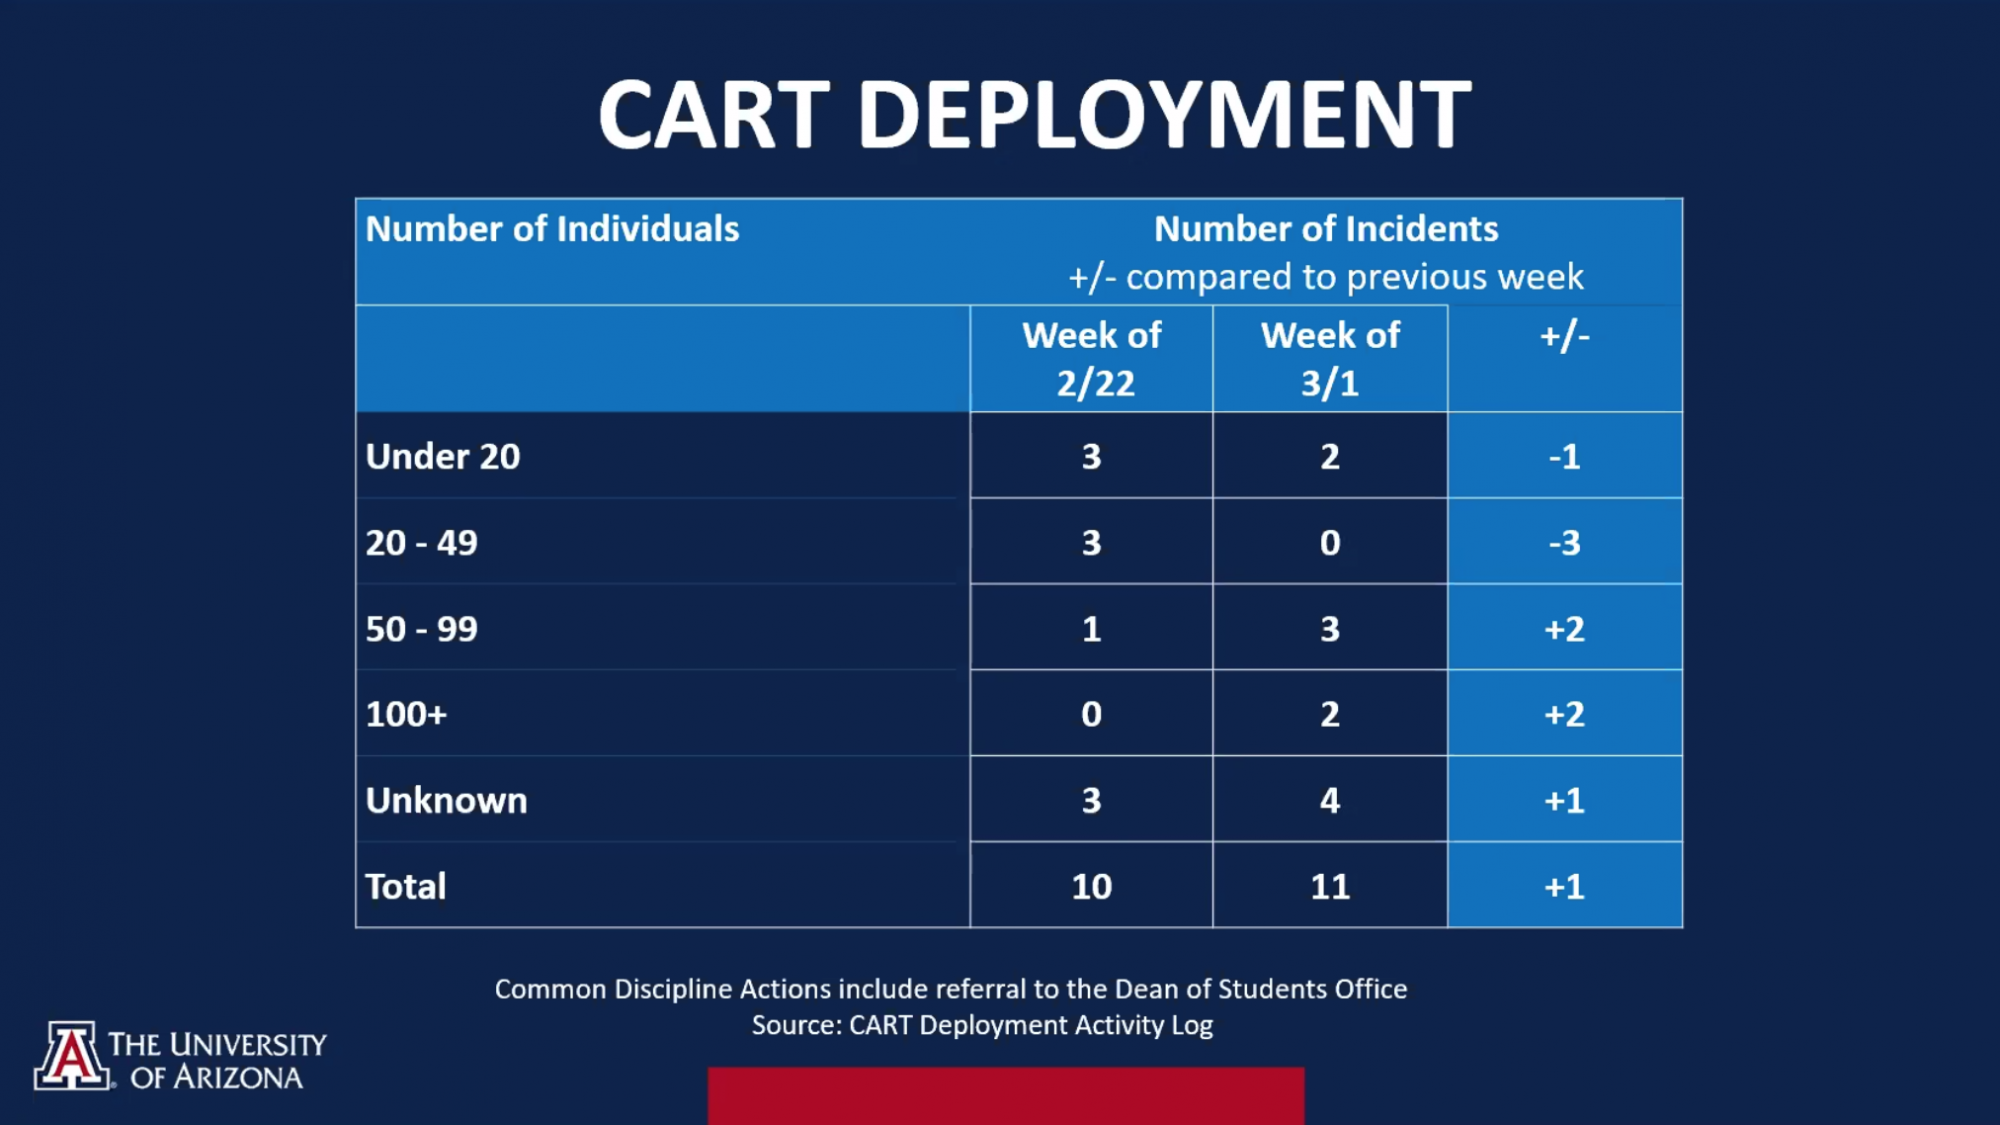 Screenshot of CART deployments from the March 8 virtual university status update meeting Monday, March 8. CART deployments increased slightly since the previous week.